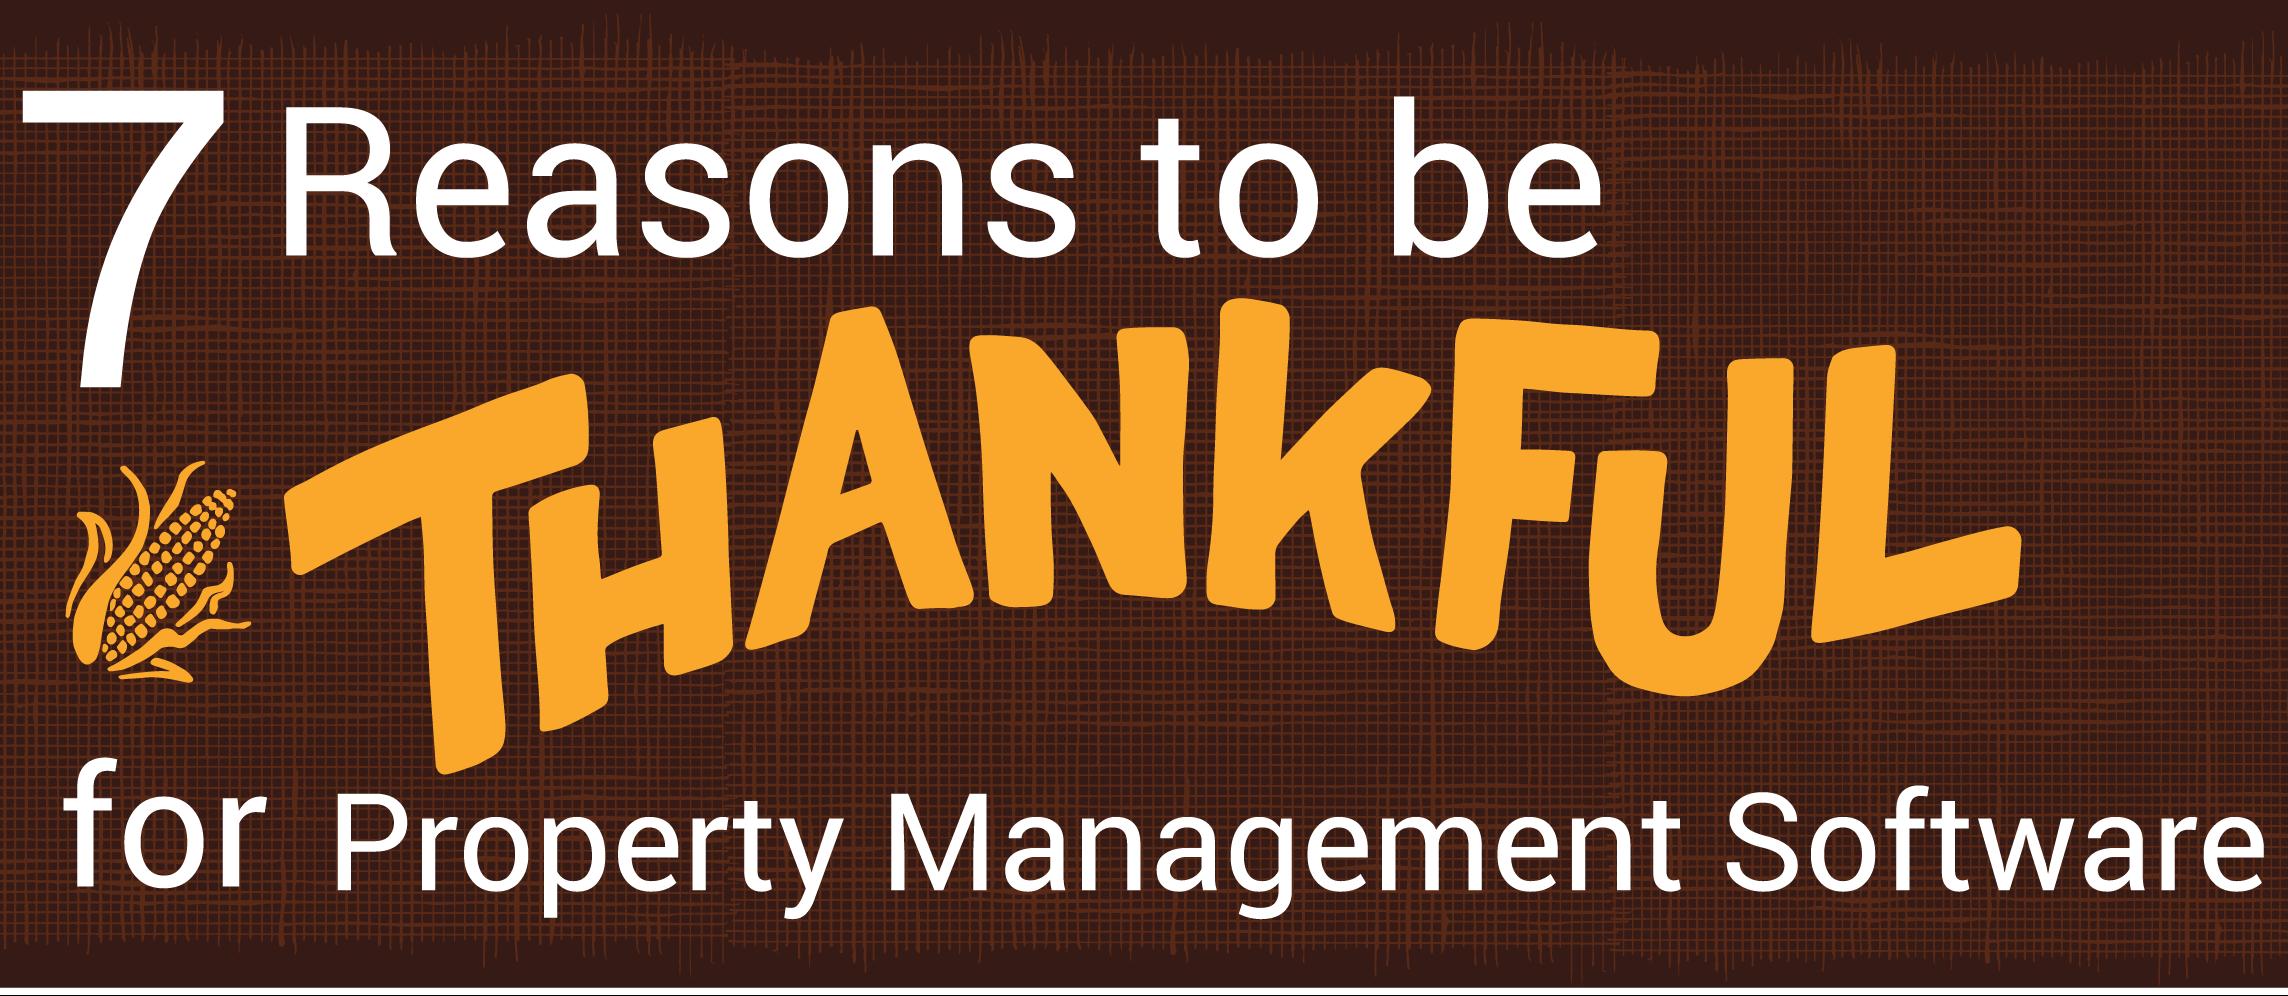 Thankful for Property Management Software